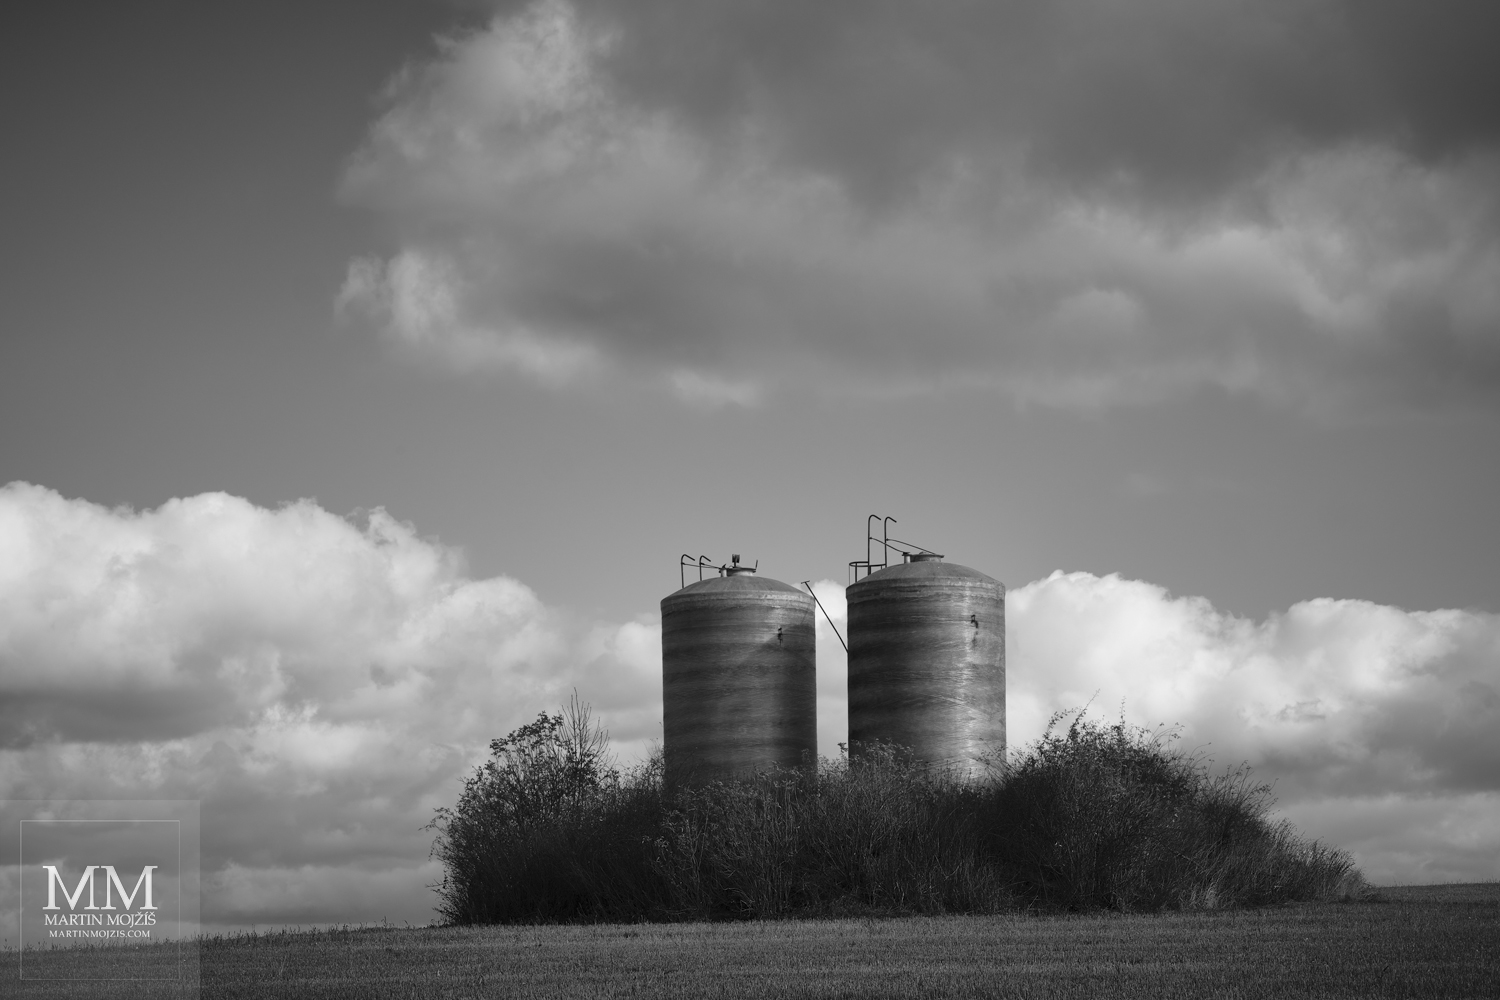 Two vertical cylinders in a field. Black and white fine art photograph A FORGOTTEN SHIP, photographed by Martin Mojzis.